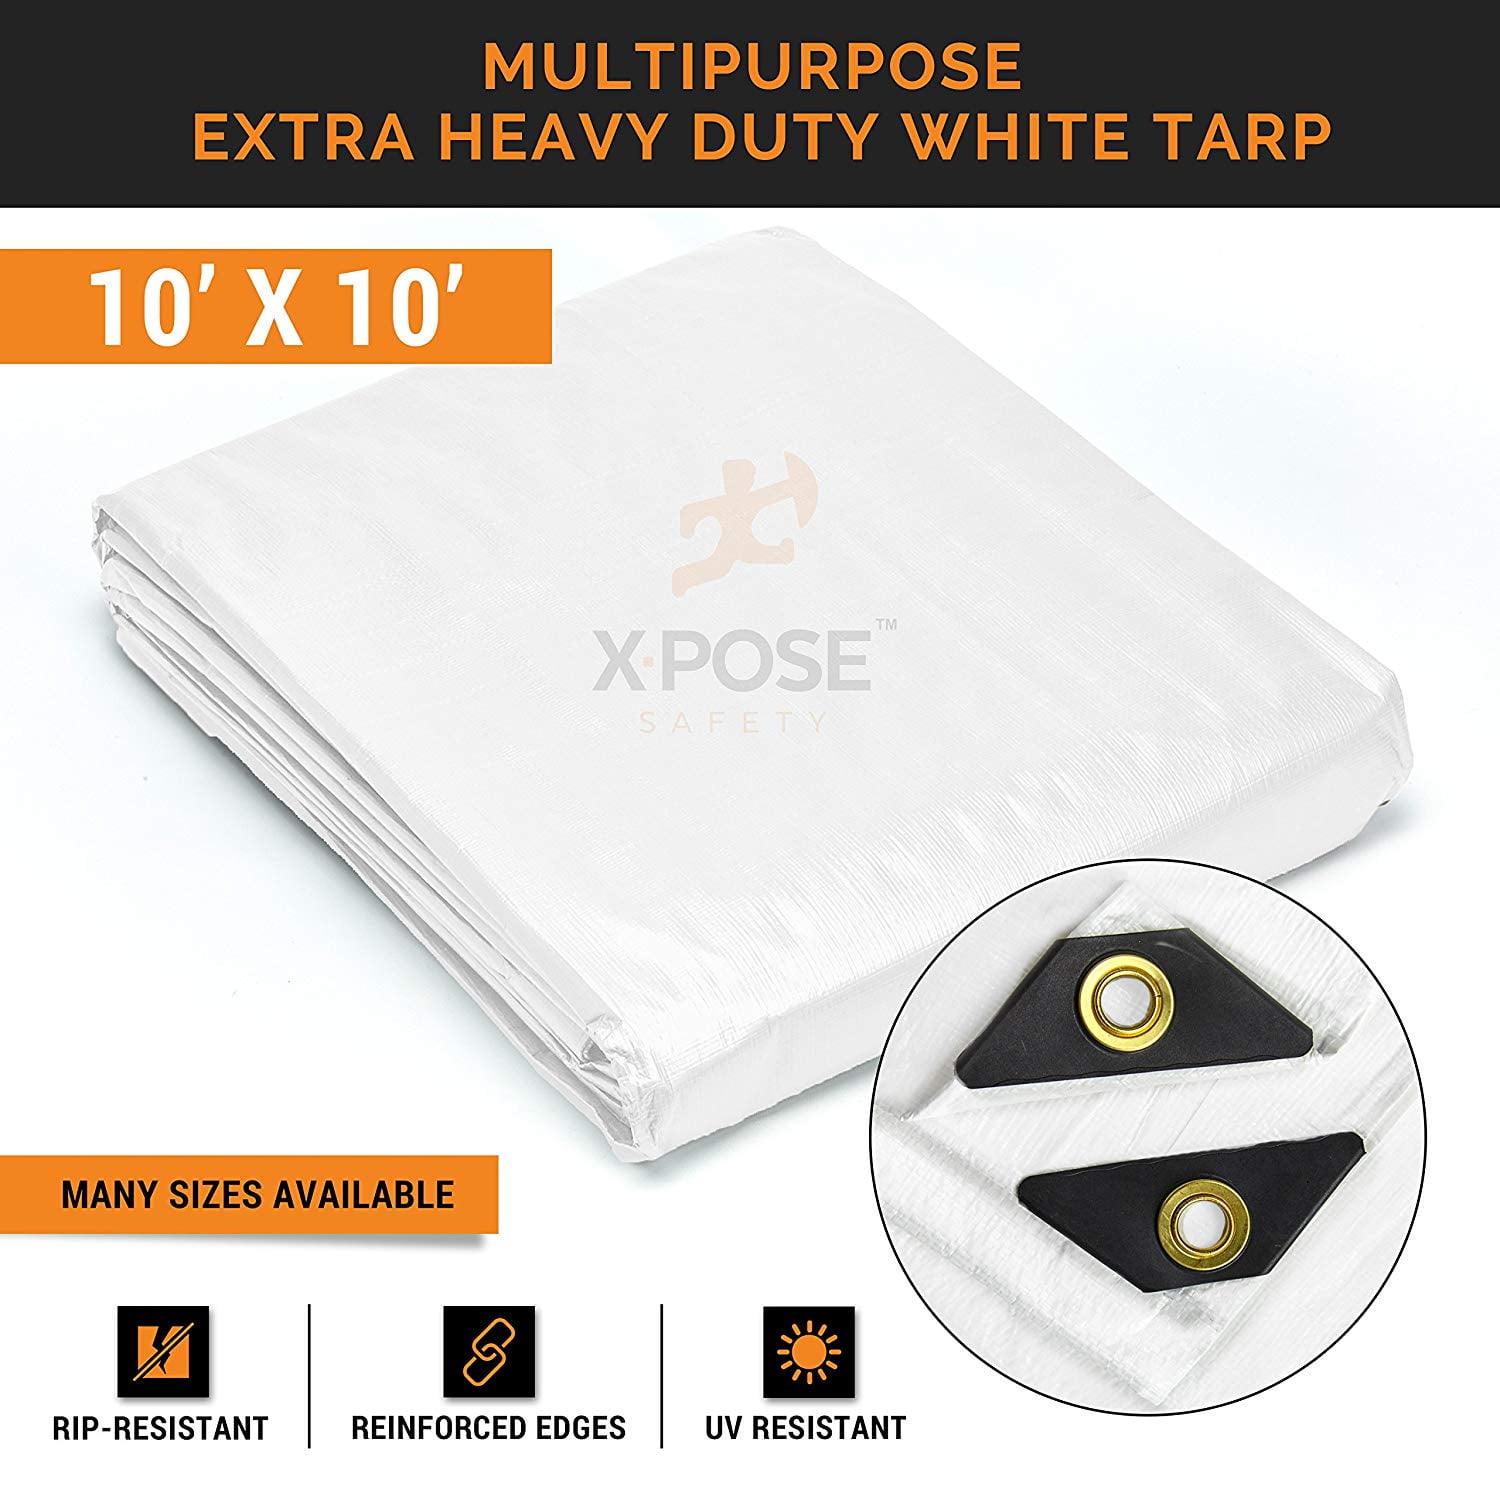 Weather Proof Heavy Duty White Poly Tarp 12 x 20 Multipurpose Protective Cover Extra Thick 12 Mil Polyethylene by Xpose Safety Rip and Tear Resistant Durable Waterproof 